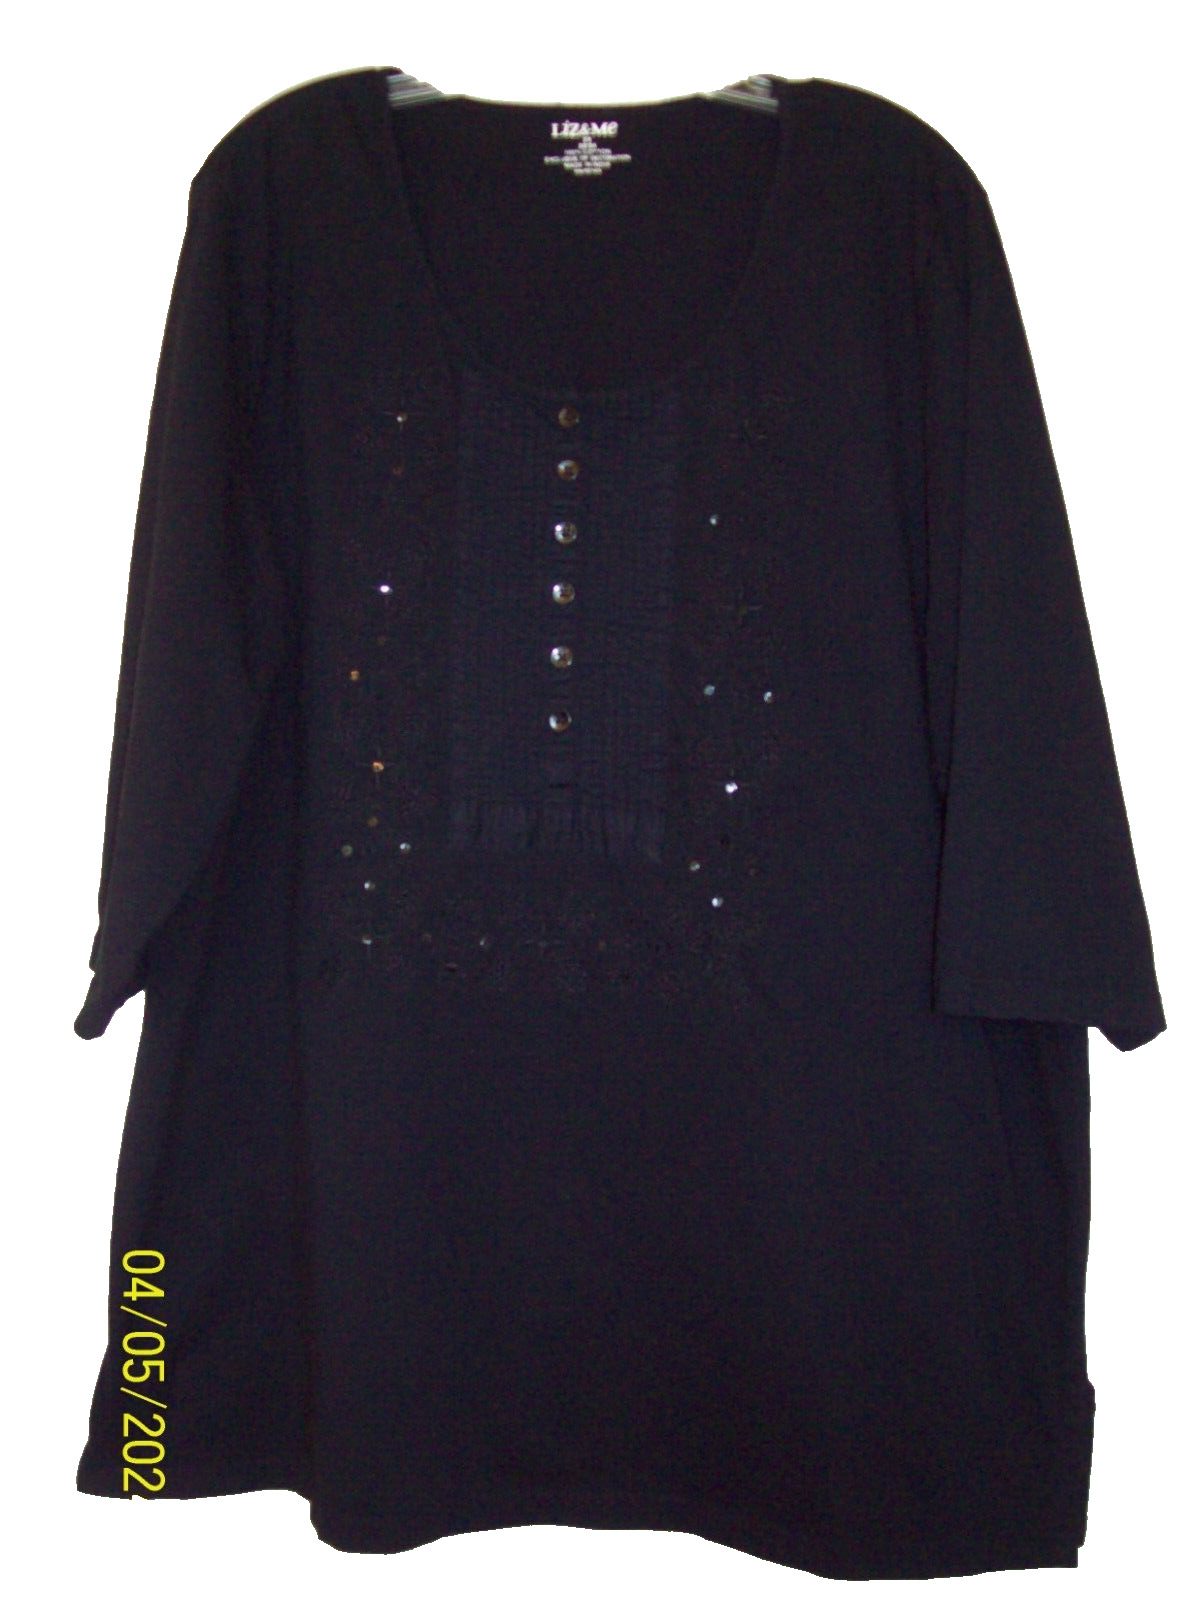 2X 22/24 Liz & Me Black 100% Cotton Top 3/4 Sleeve Sequins & Embroidery Bust 52\